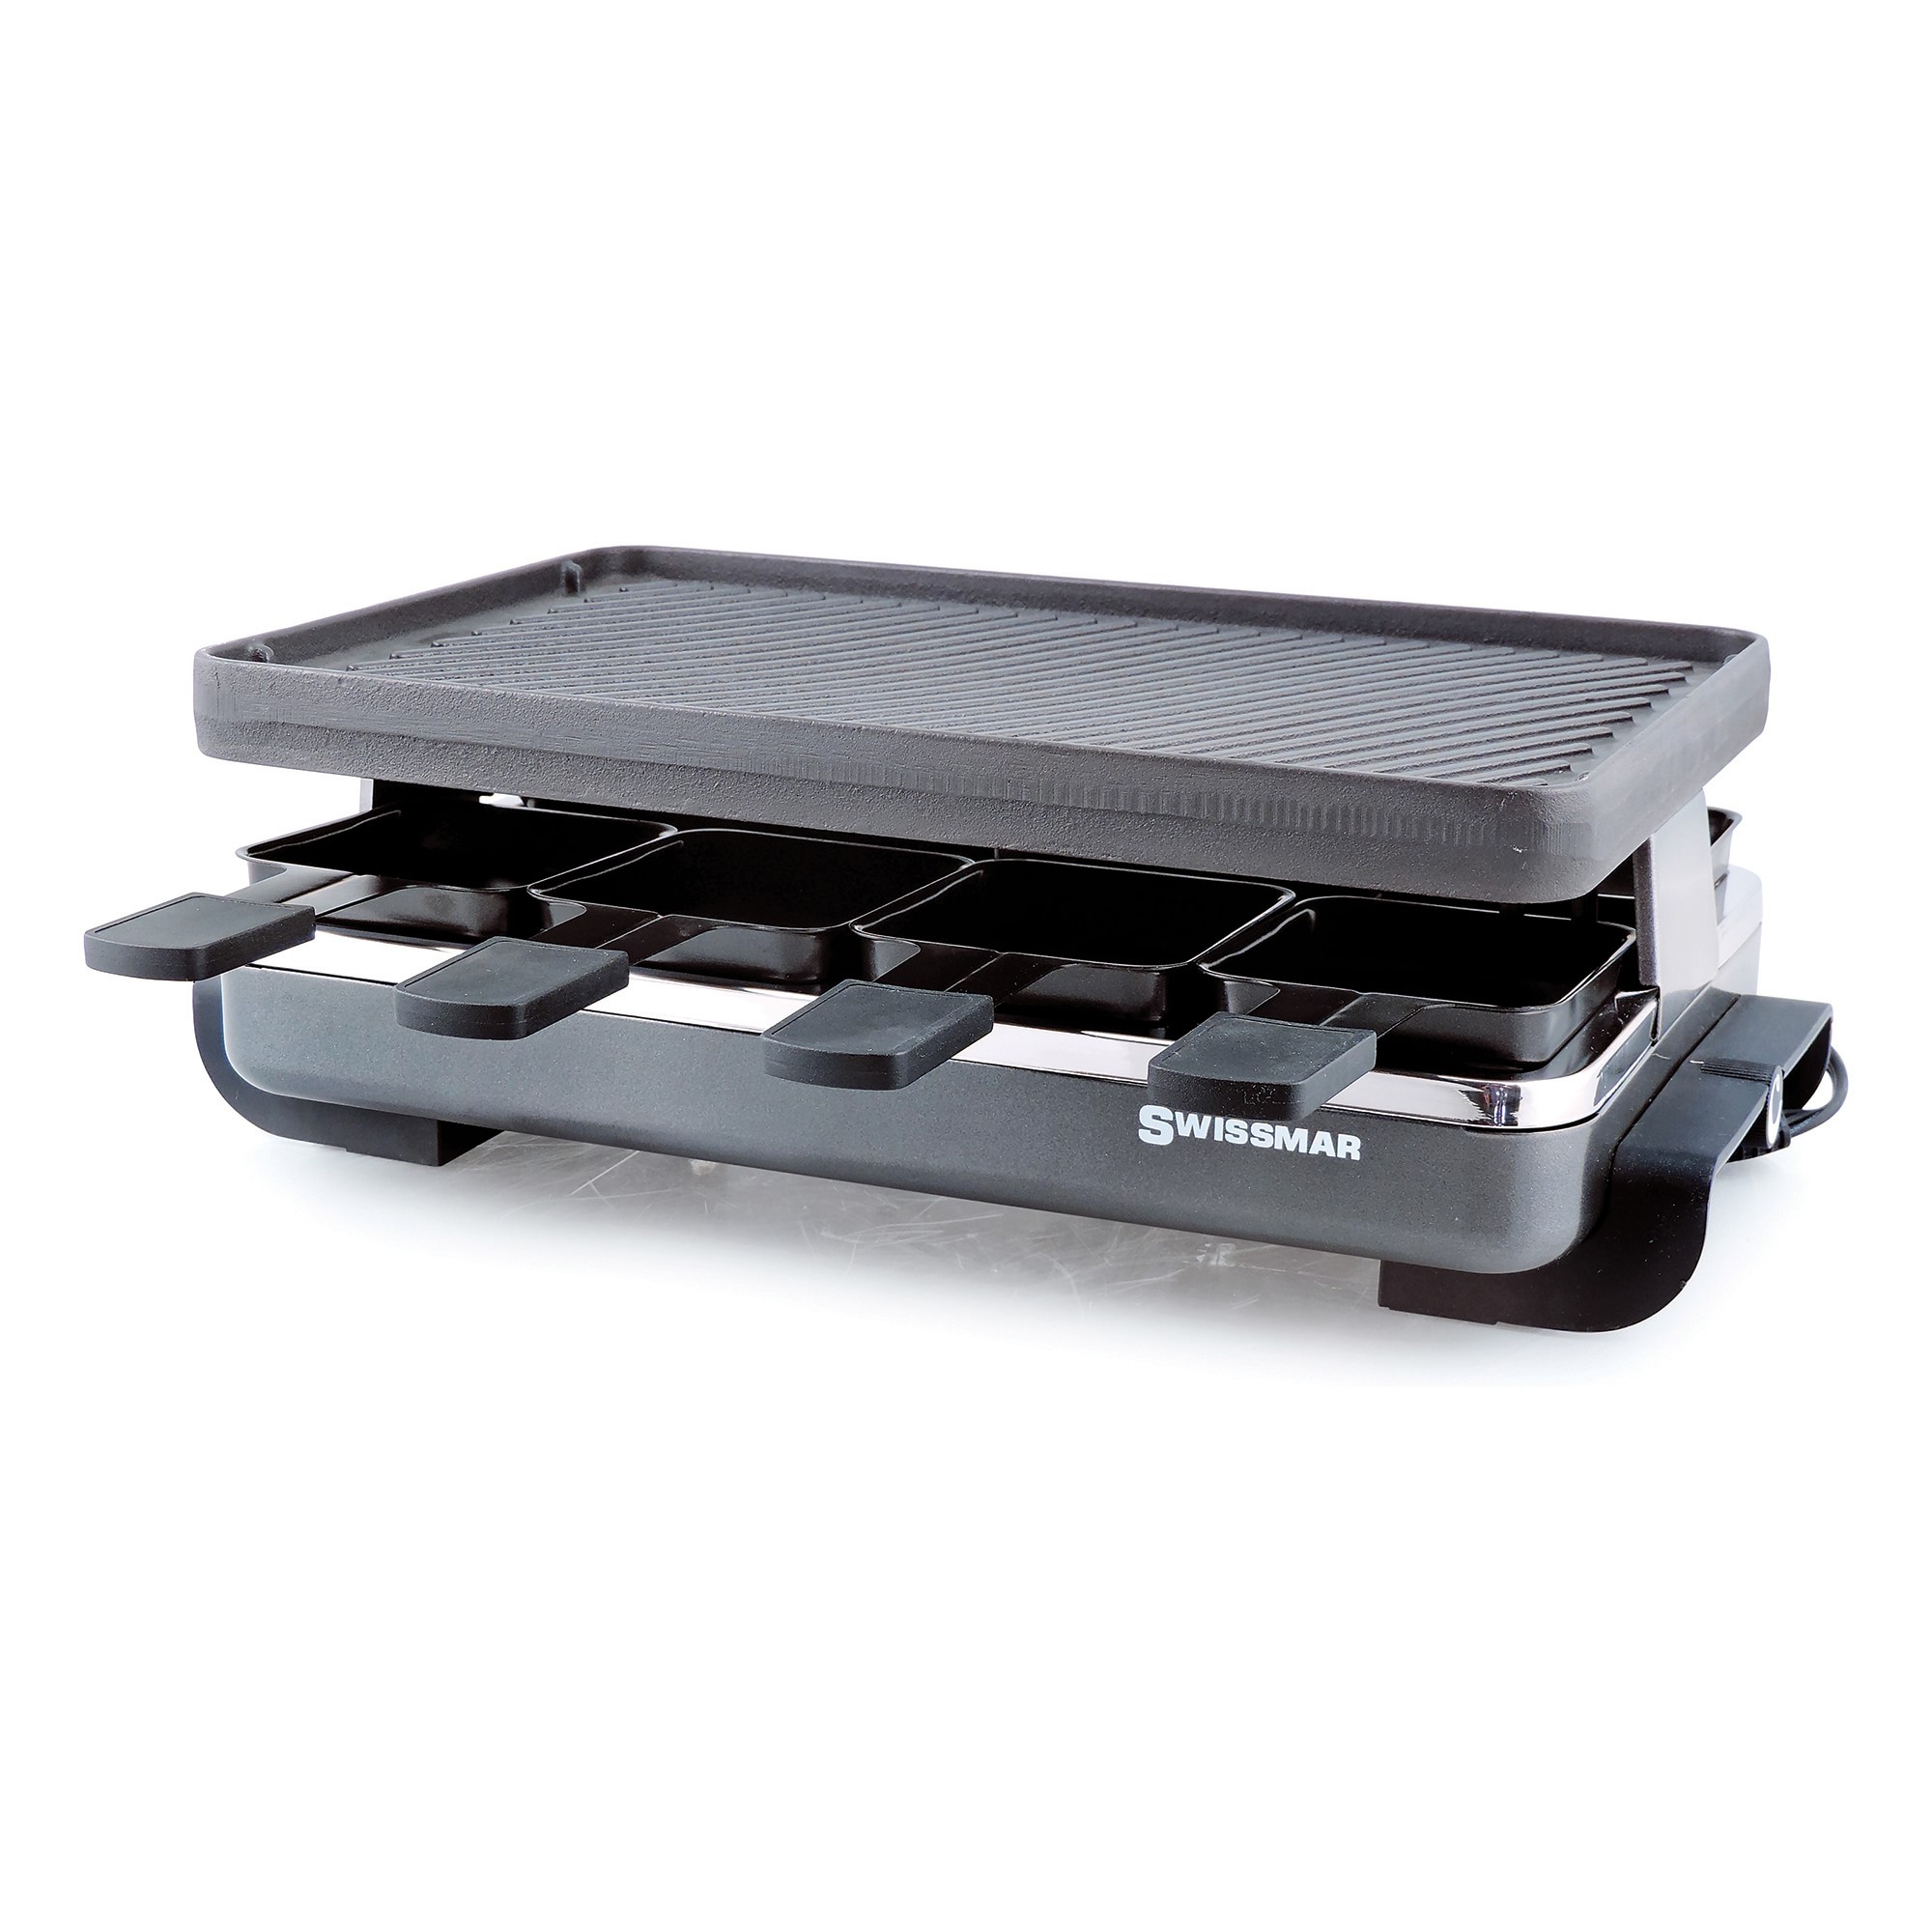 Swissmar Classic Raclette with Cast Iron Grill